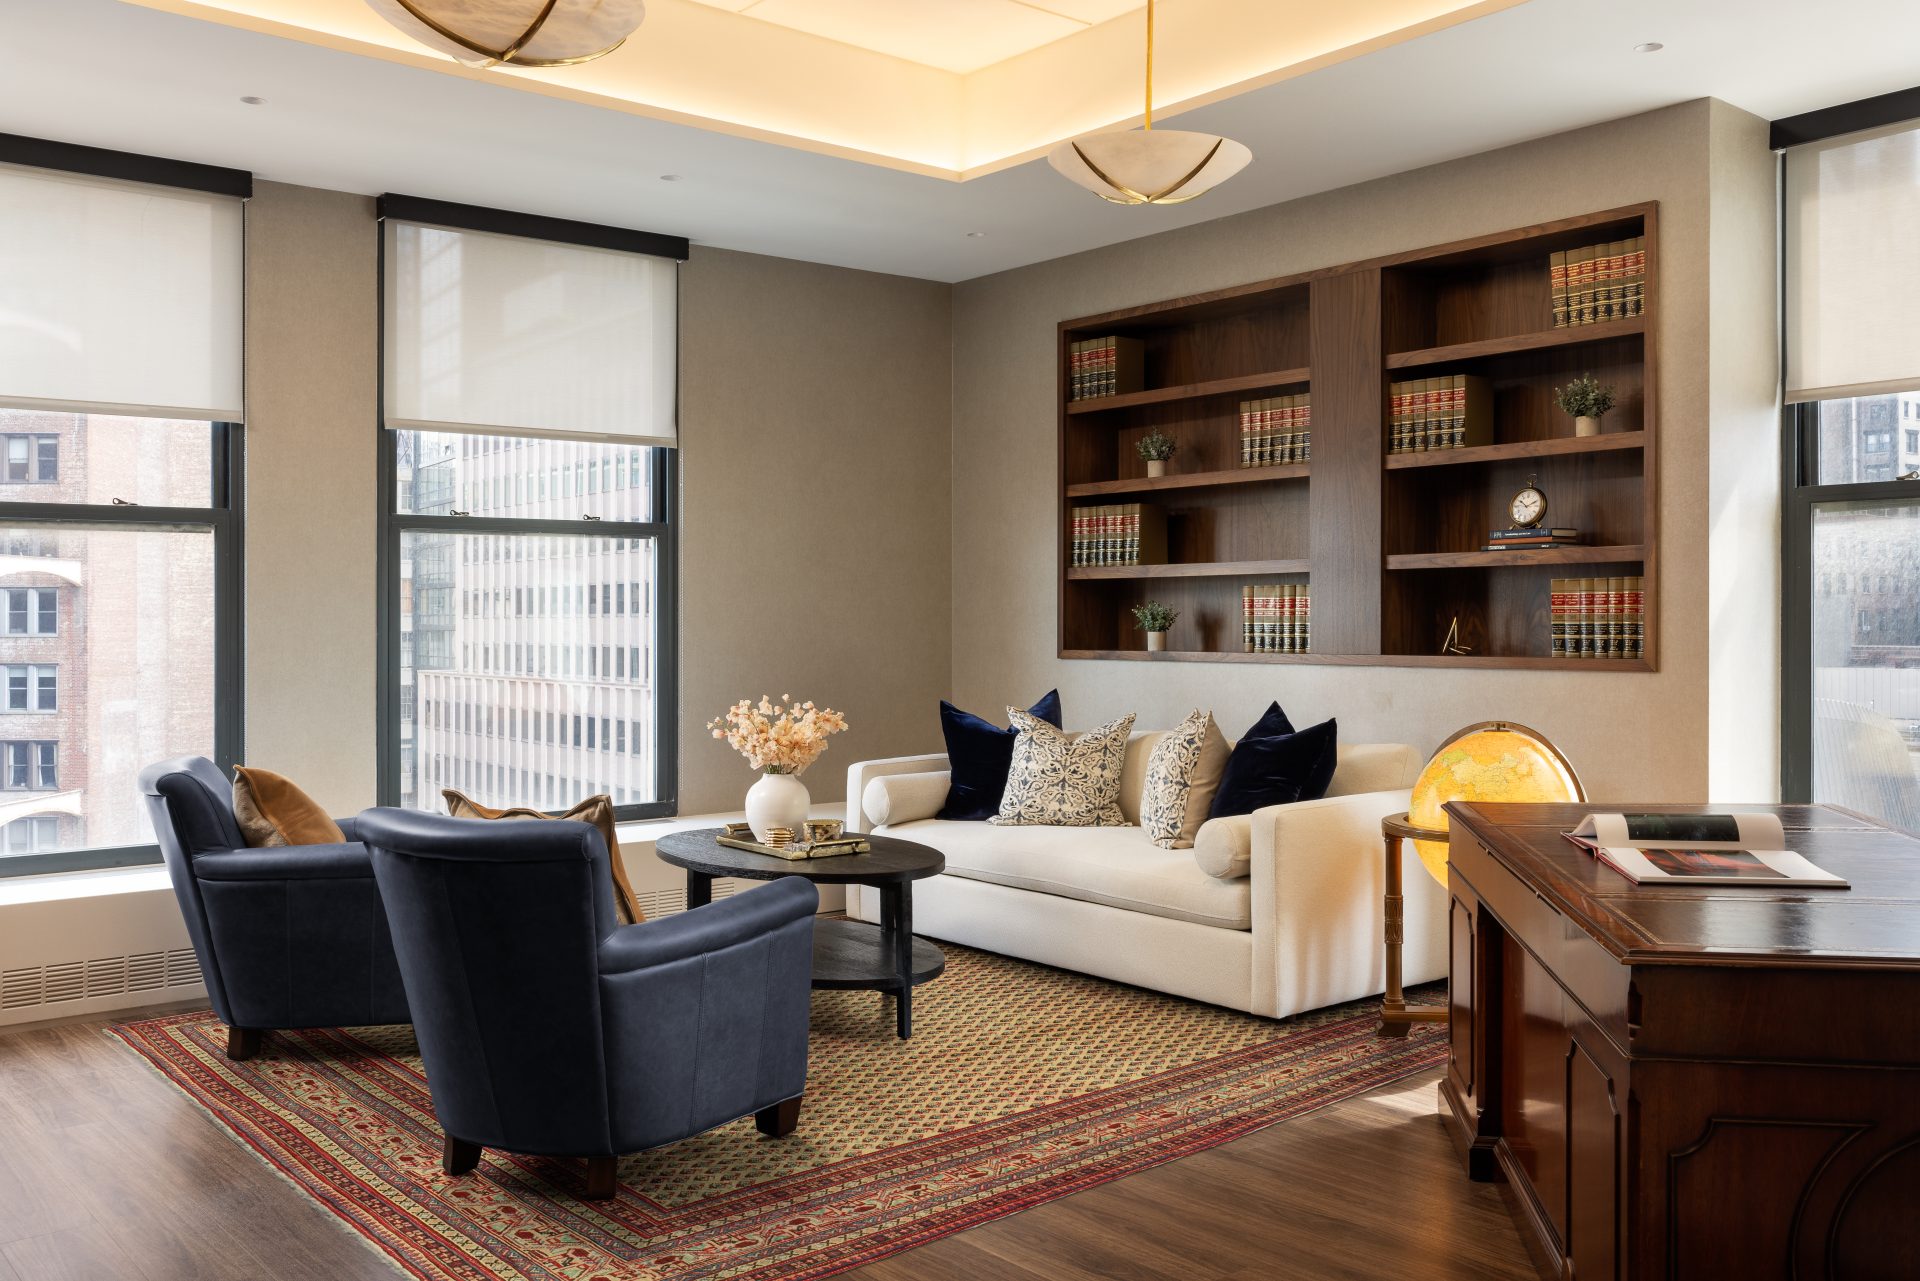 Lounge area in New York City law firm that was recently renovated